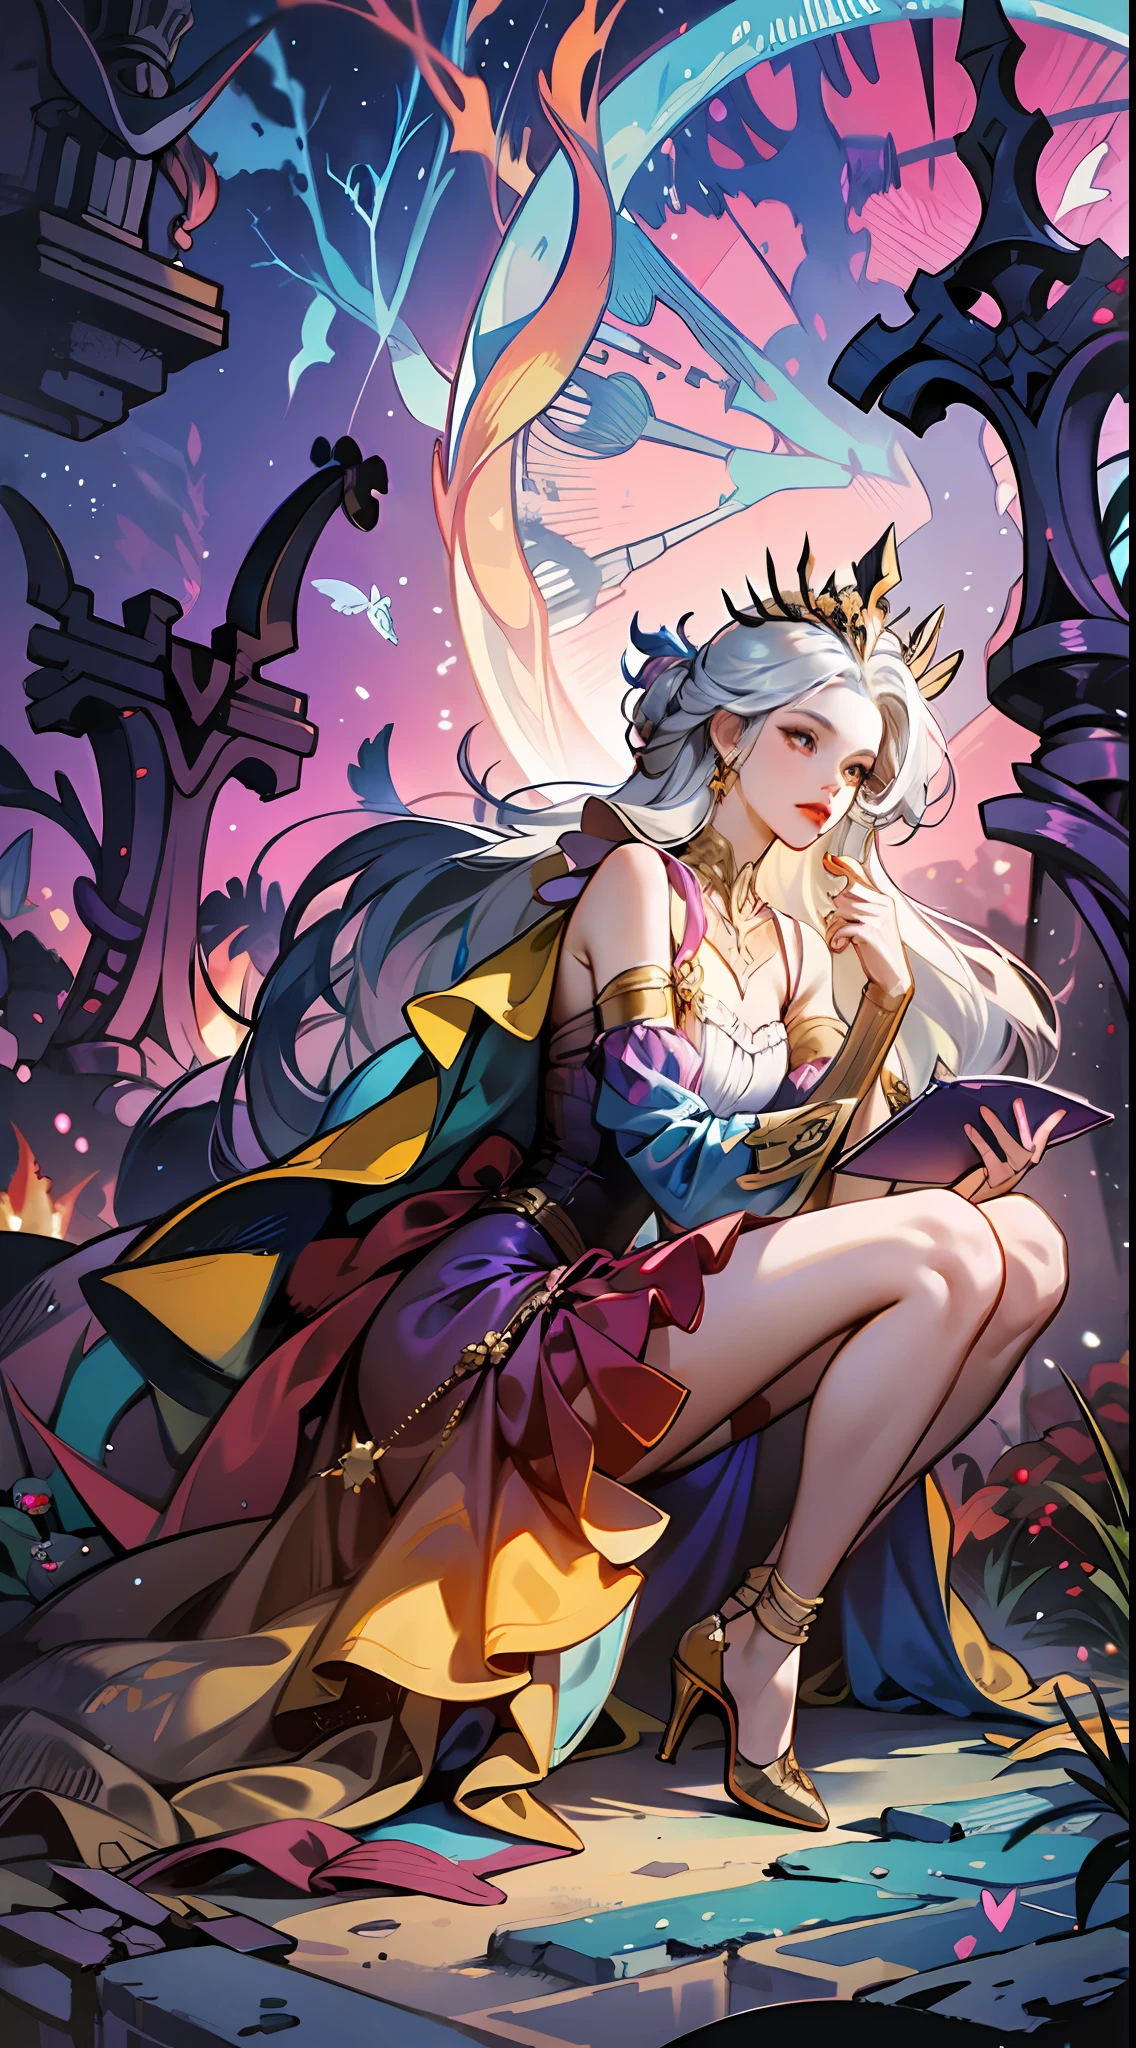 In a Final Fantasy style illustration. A powerful sorceress invokes the powers of thunder. She is very beautiful and wears a knee-length dress with straps and ruffles, heels and a pointed hat. She is in a strange place of ancient buildings half buried by the jungle. gold, silver, iridescent